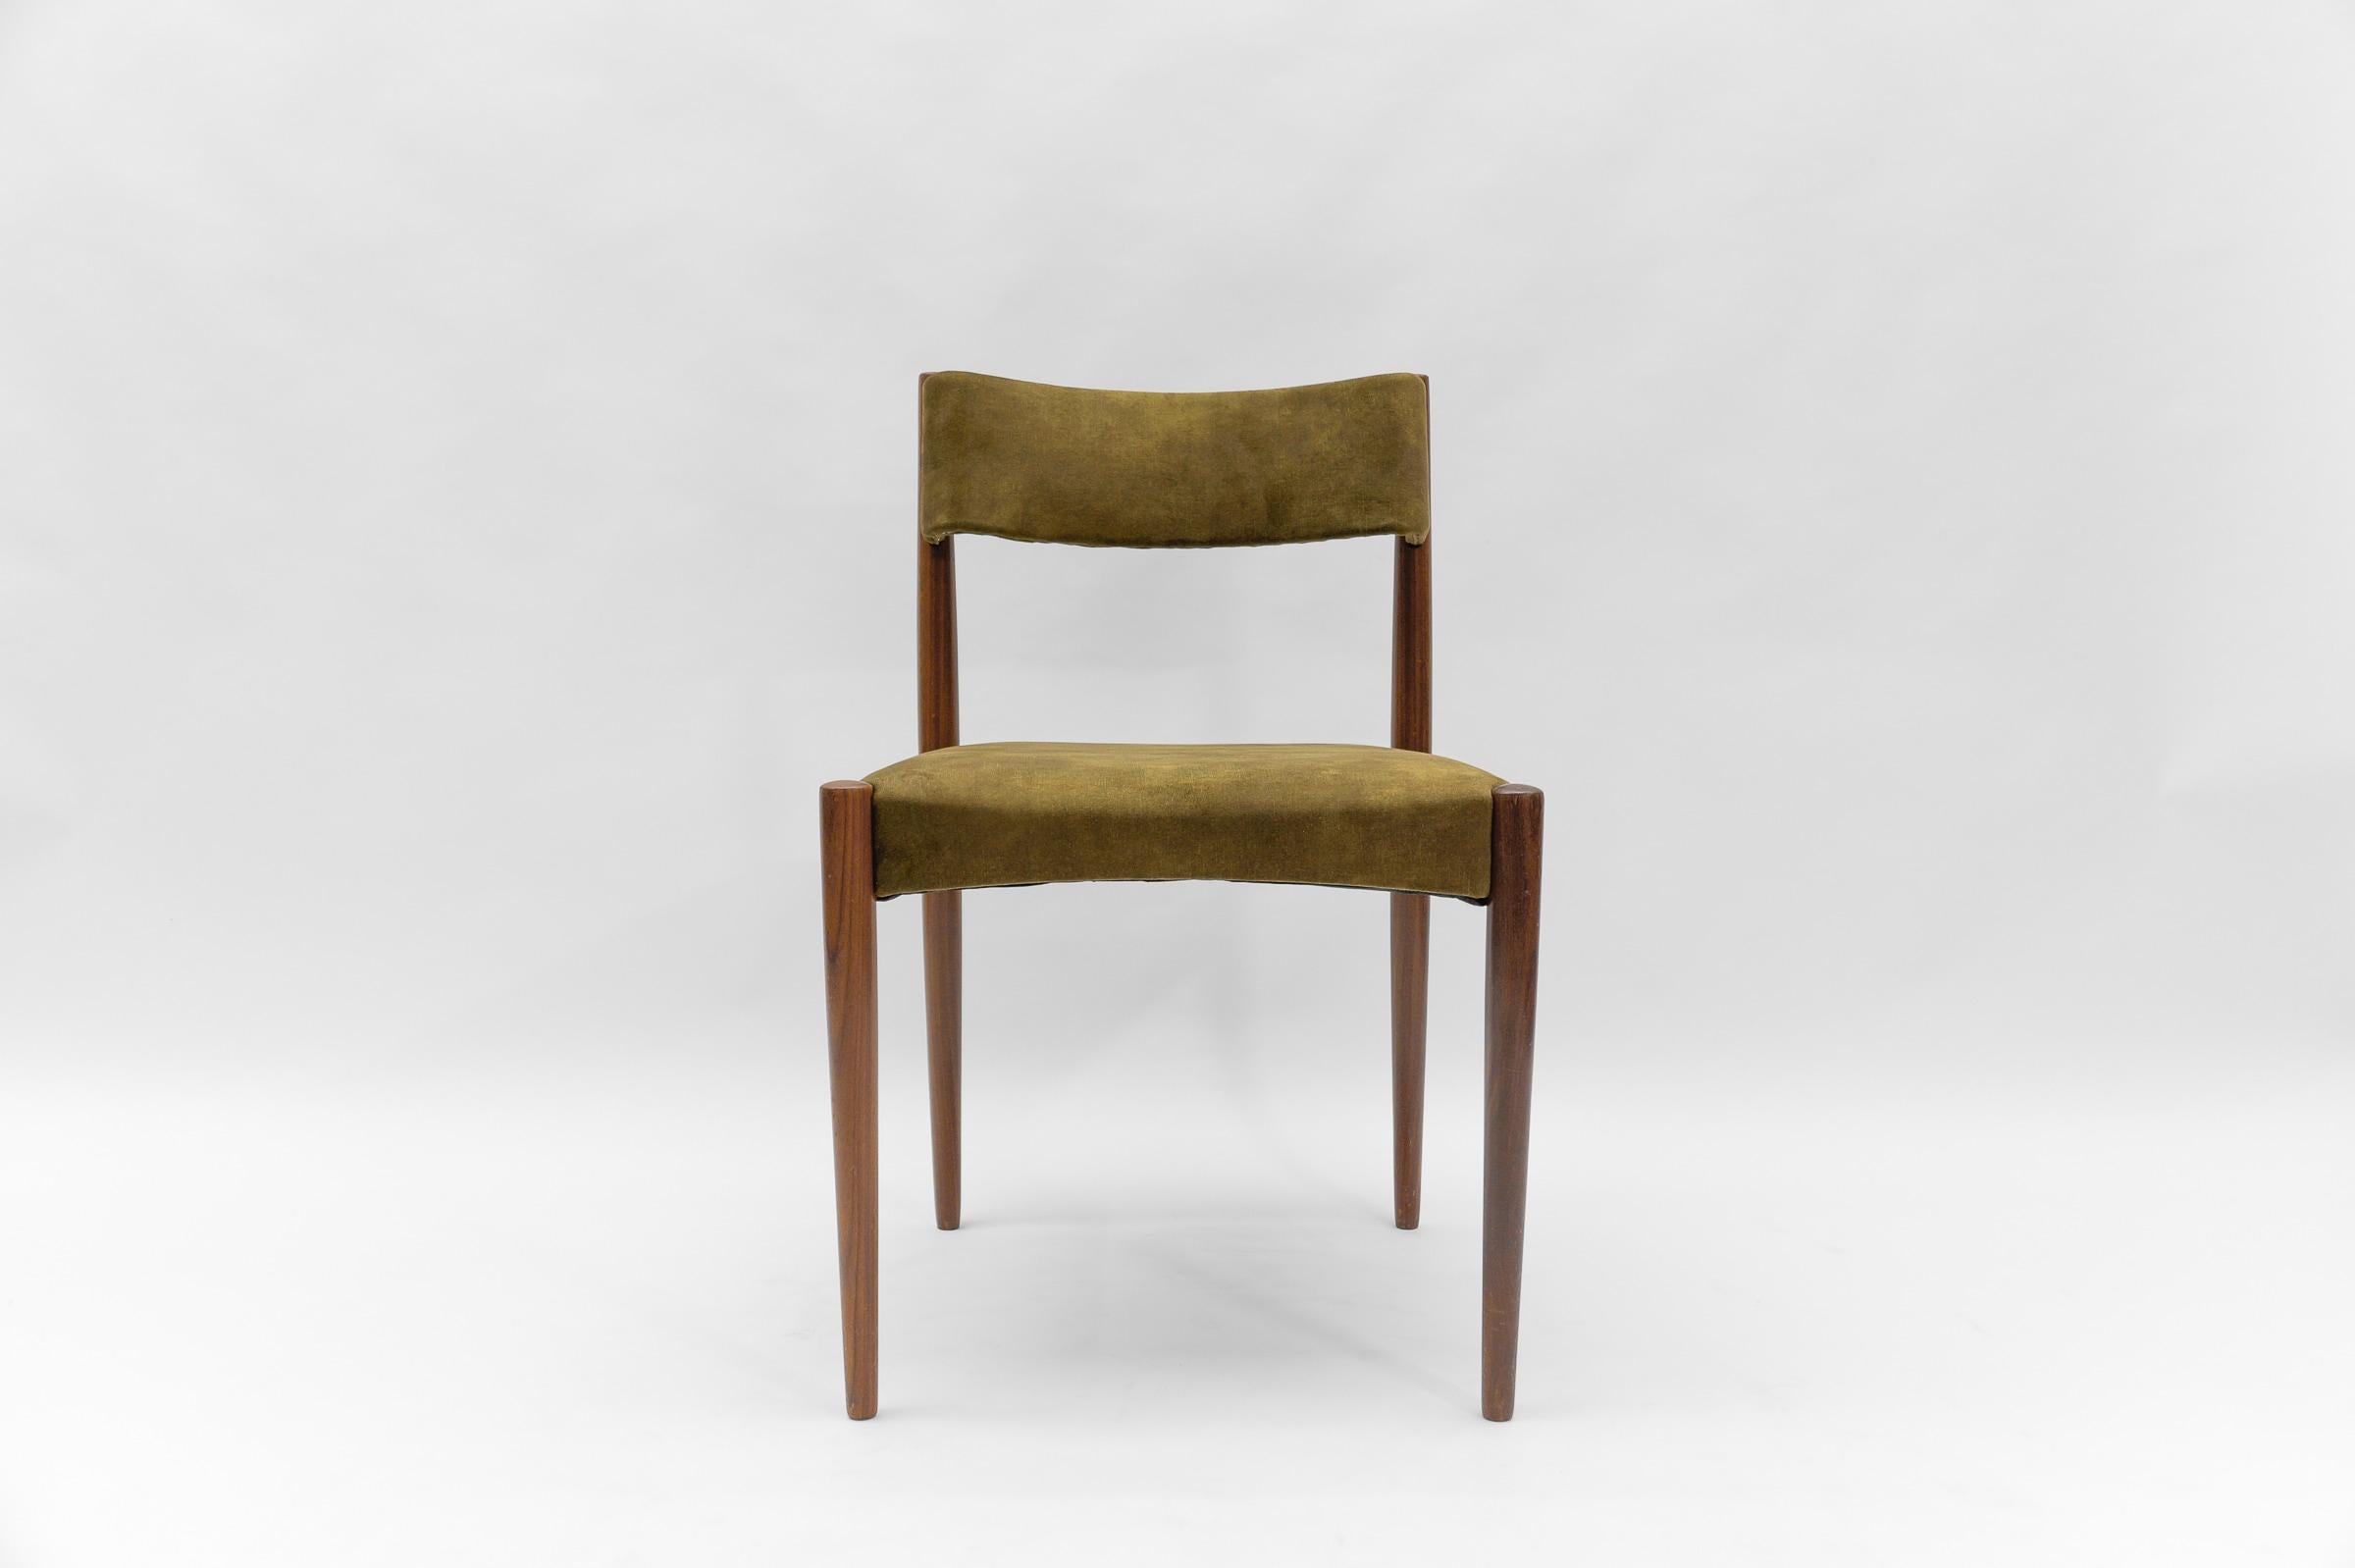 Four Wooden Scandinavian Dining Room Chairs, 1960s For Sale 1